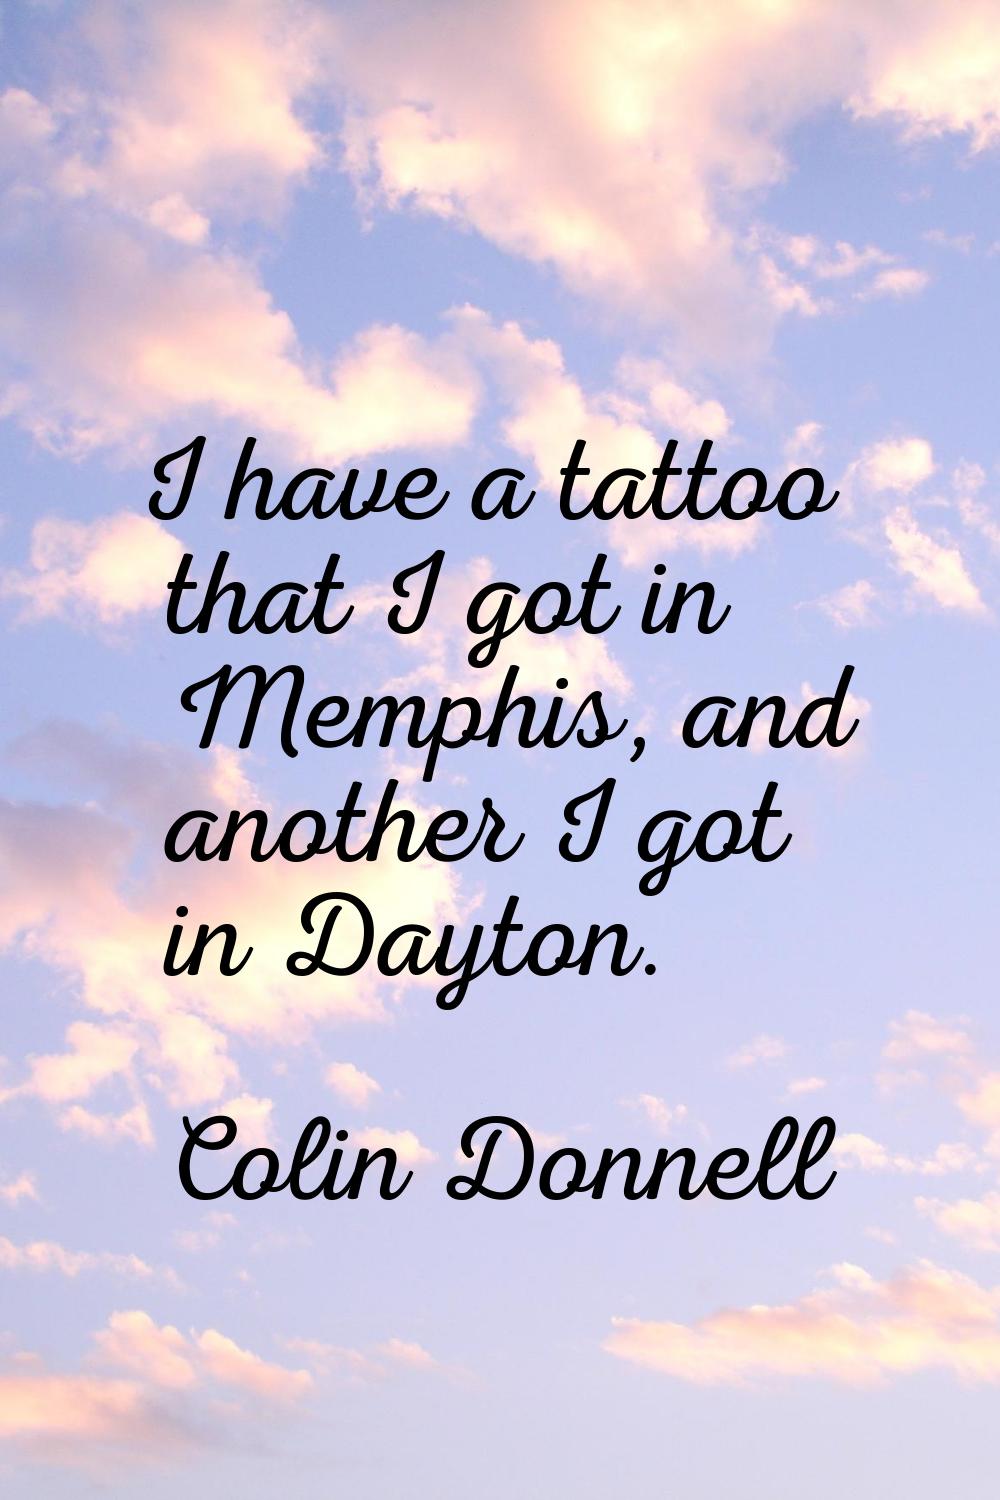 I have a tattoo that I got in Memphis, and another I got in Dayton.